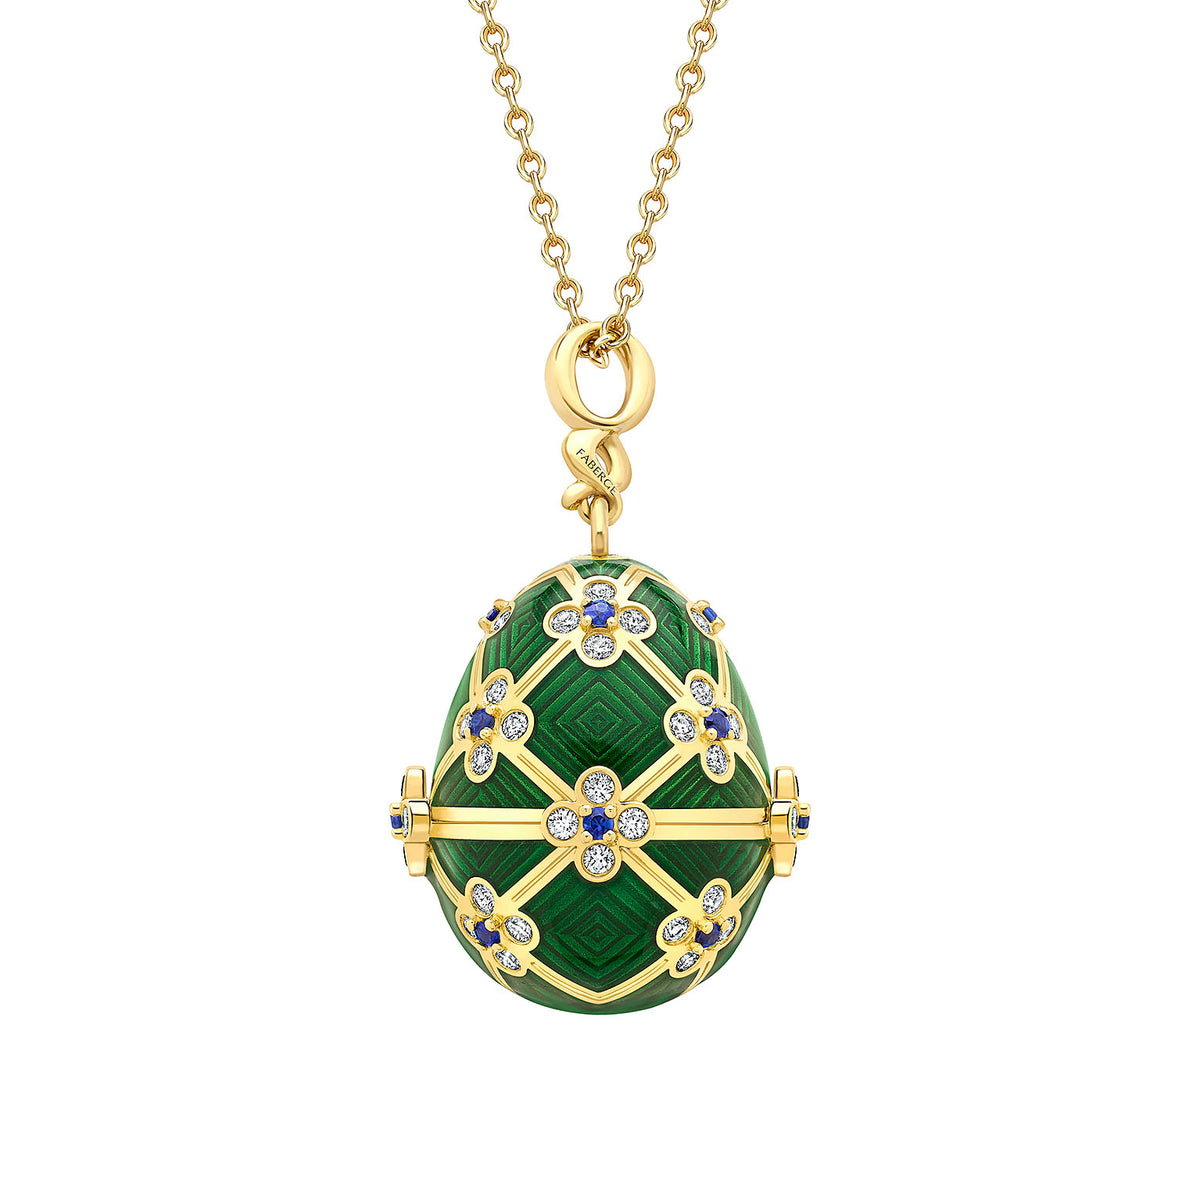 Faberge 18ct Yellow Gold &amp; Green Enamel James Bond Octopussy Egg Locket on Chain